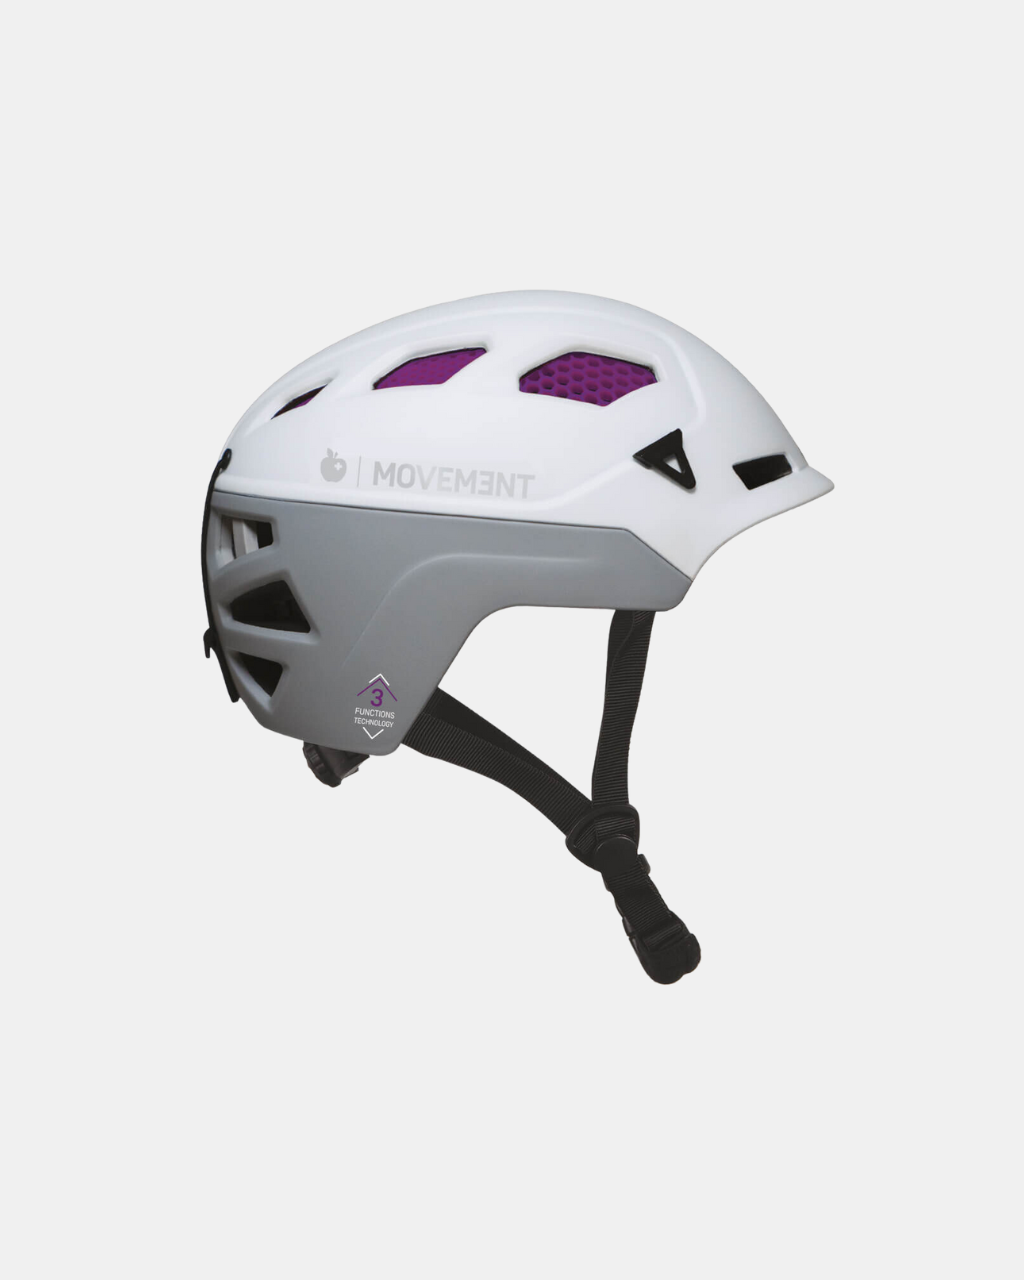 Elevate your ski experience with the advanced features of the Movement 3Tech Alpi purple helmet.